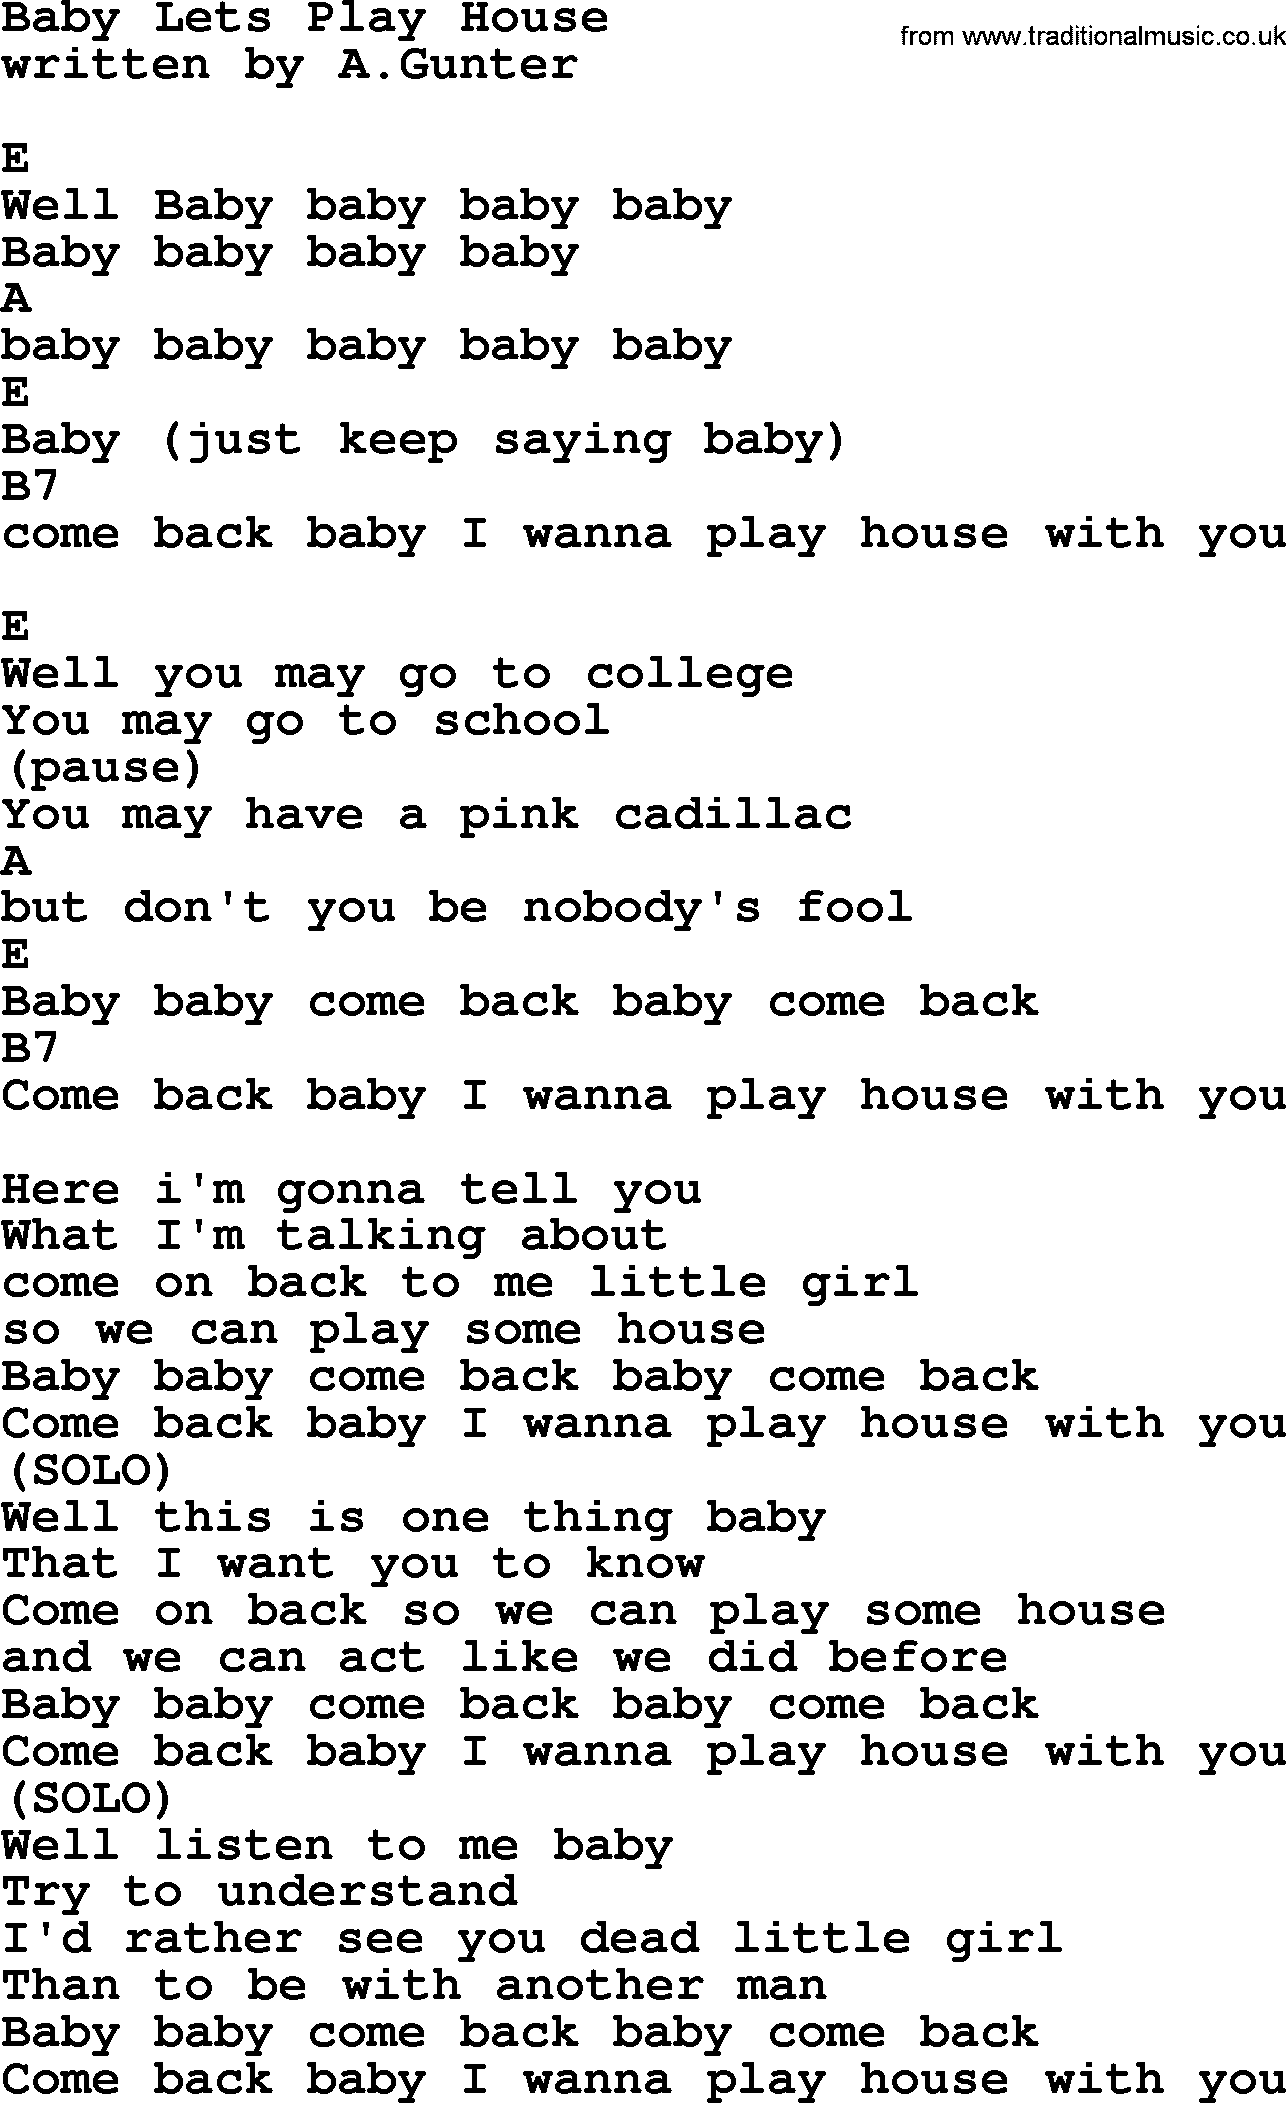 Elvis Presley song: Baby Lets Play House, lyrics and chords